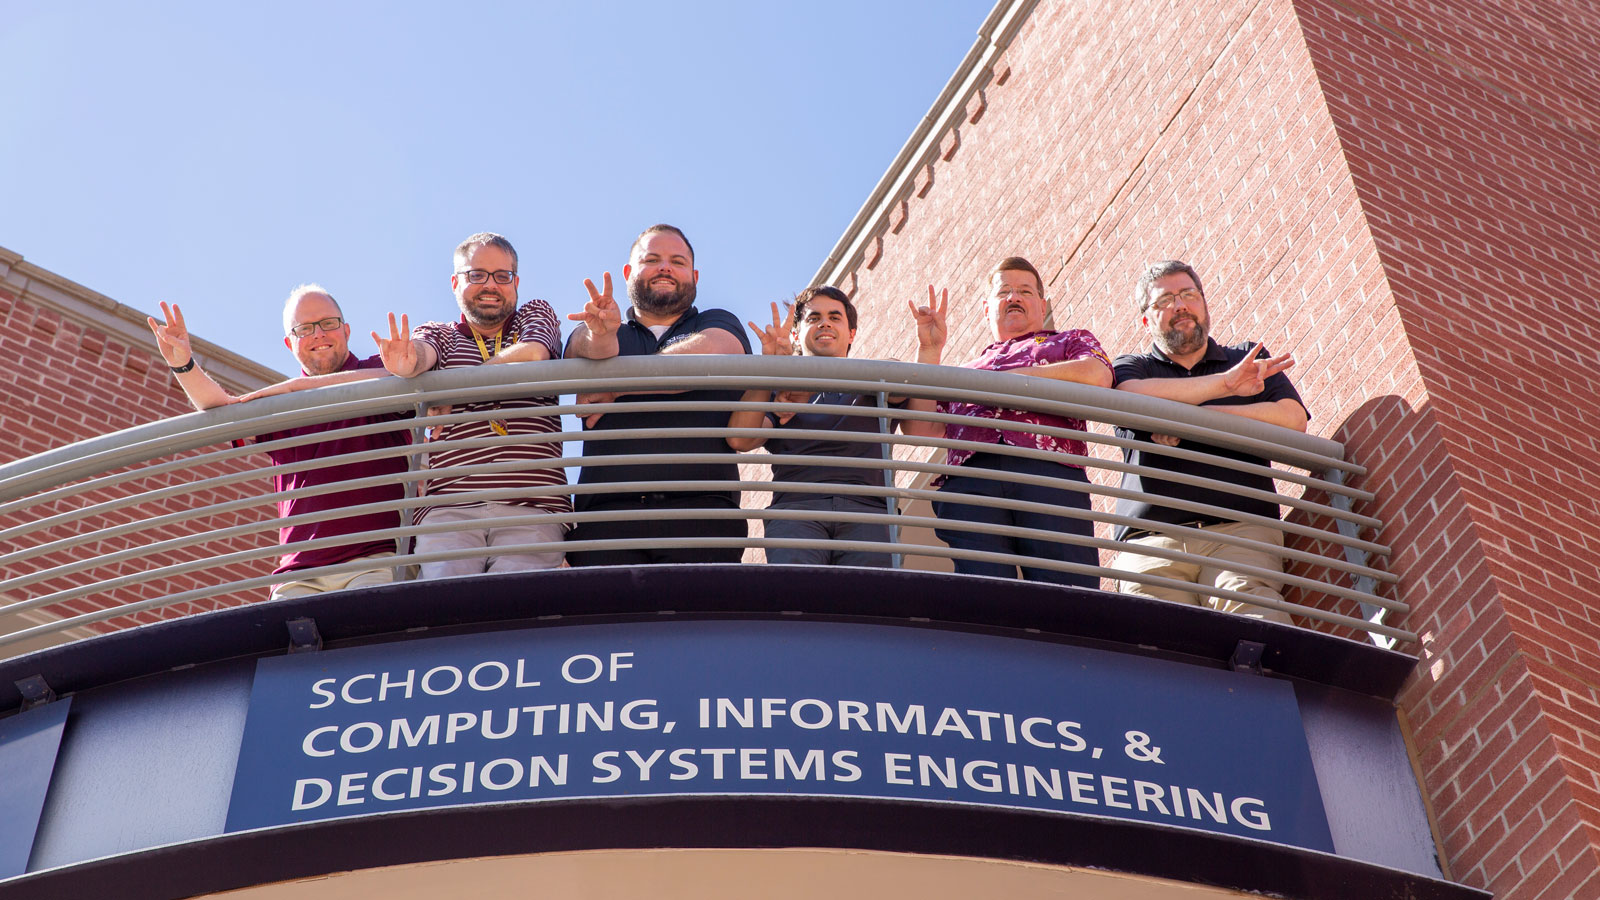 6 members of the CIDSE IT team stand on a balcony